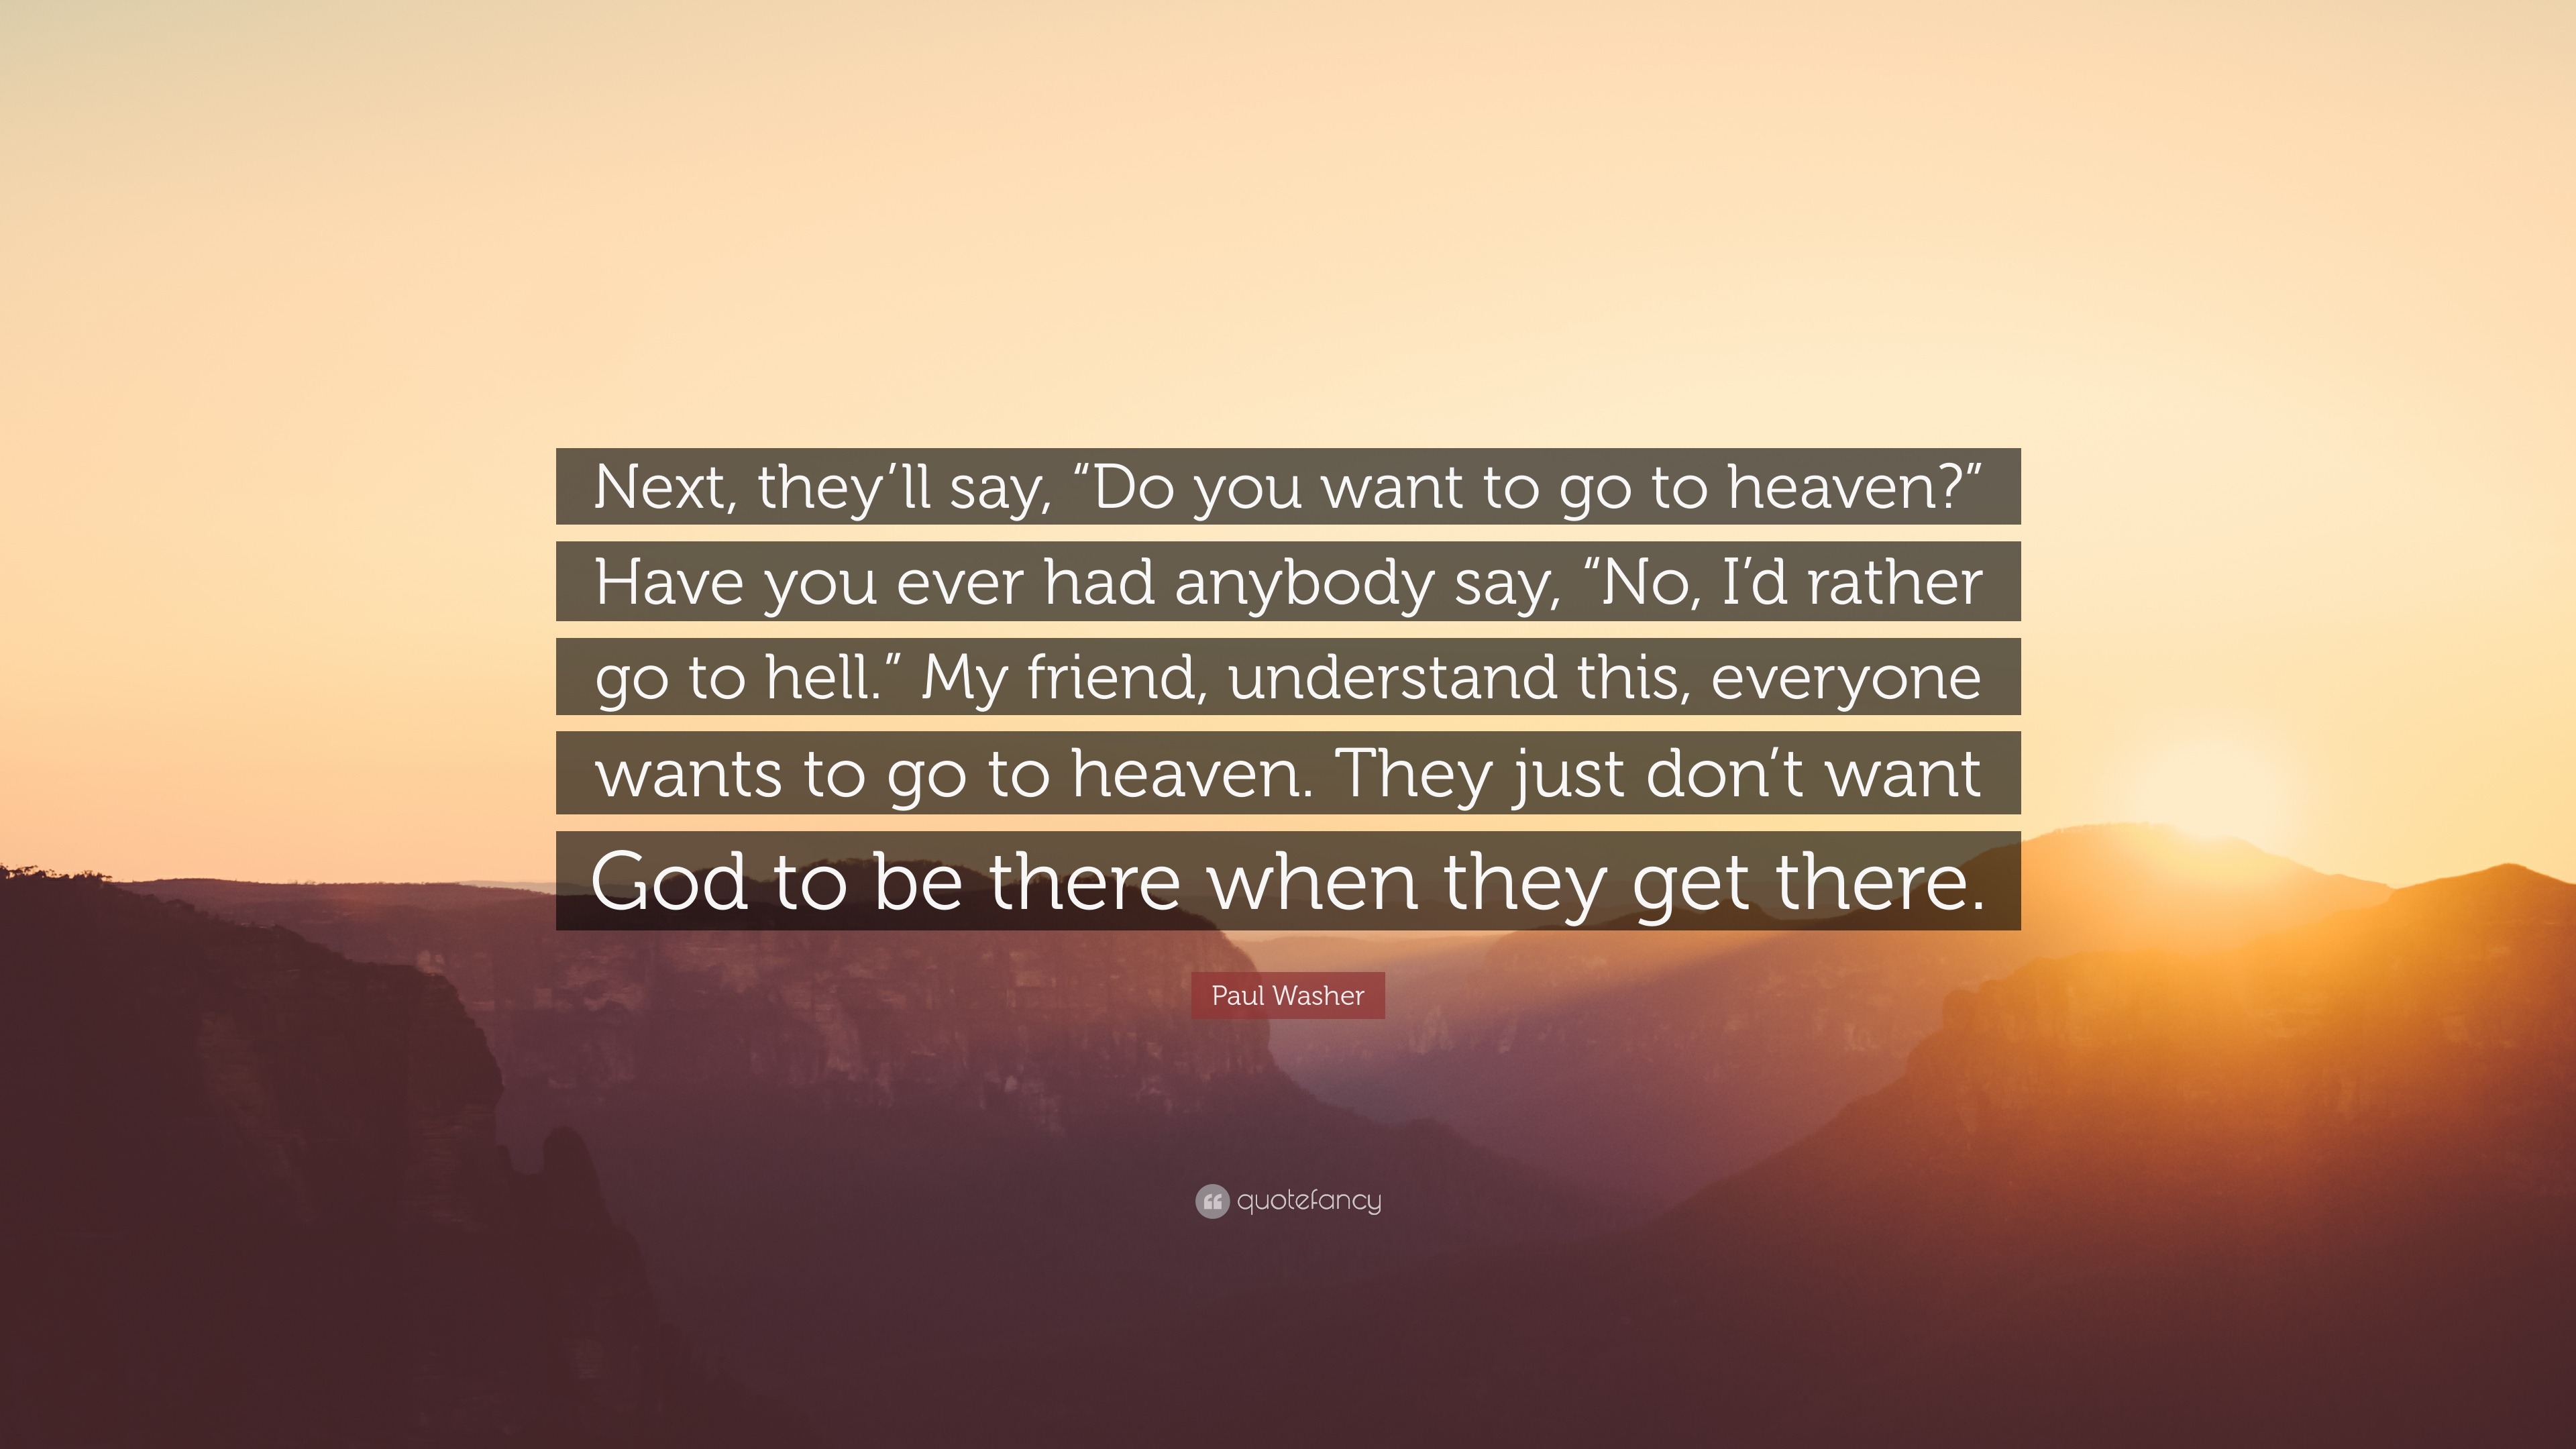 Paul Washer Quote Next They Ll Say Do You Want To Go To Heaven Have You Ever Had Anybody Say No I D Rather Go To Hell My Friend 7 Wallpapers Quotefancy